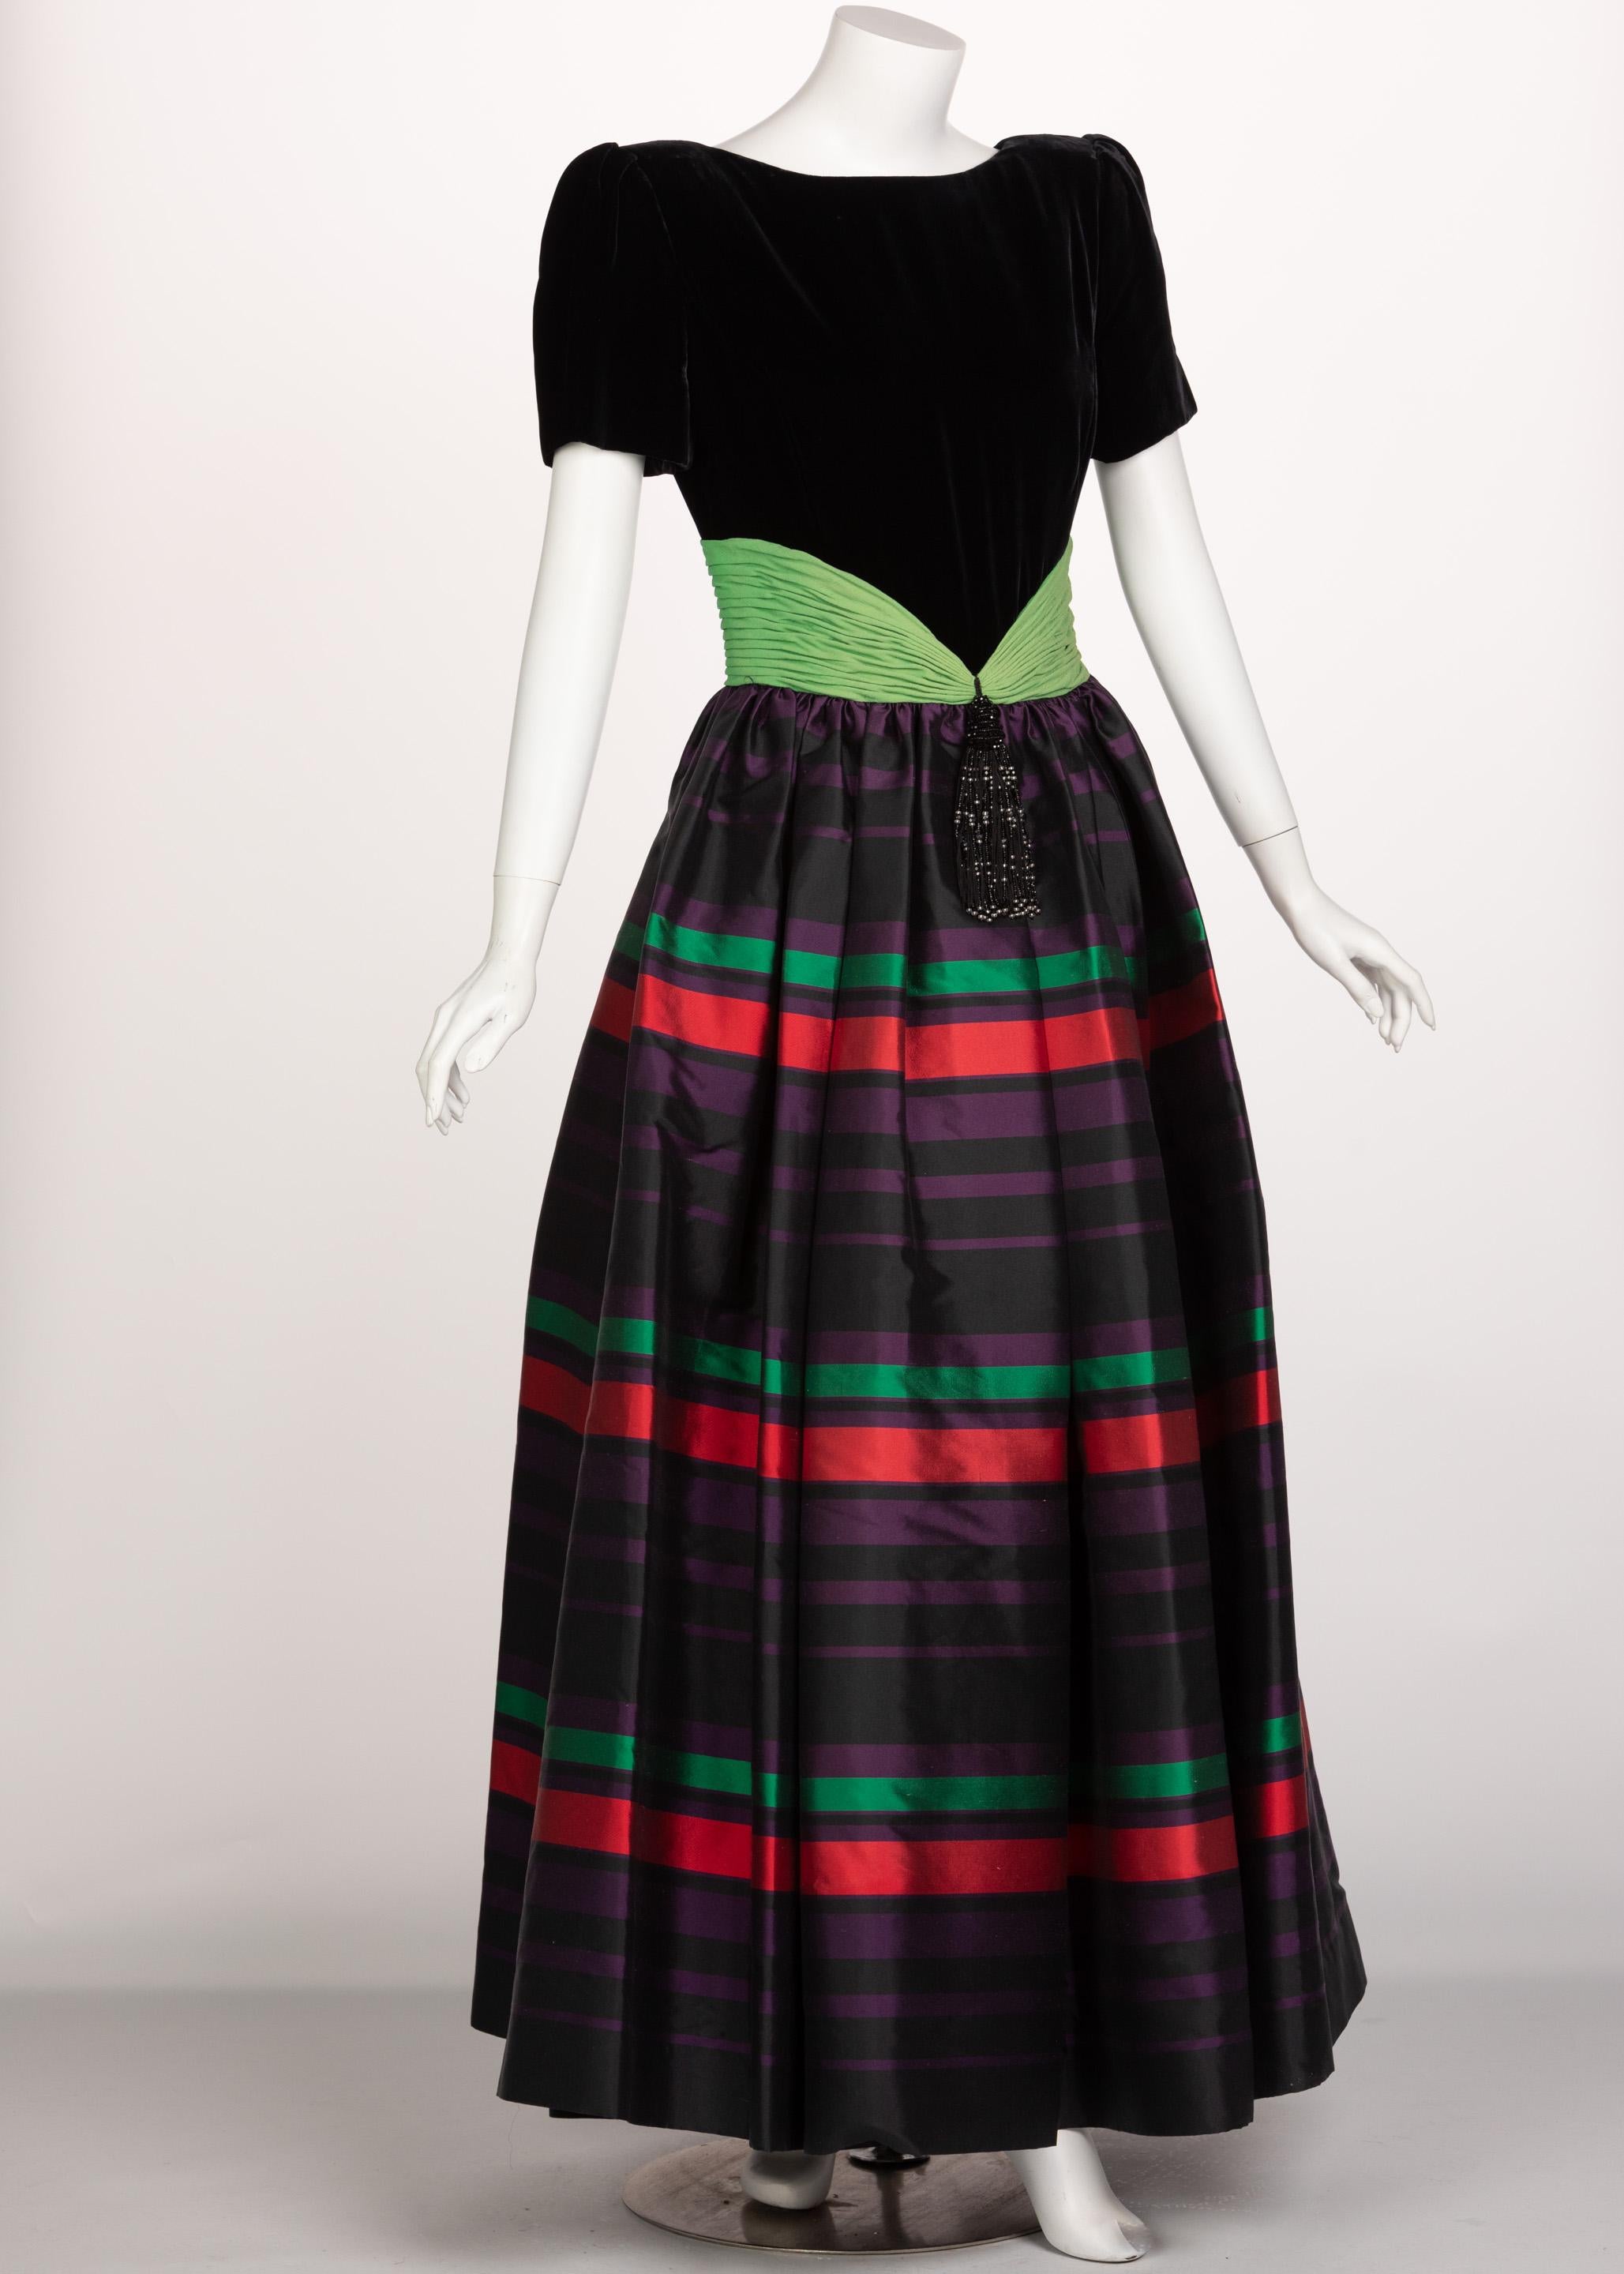 In the late 1980s, Valentino made the stripe a signature of almost all of his collection. In a similar style to other notable designers such as YSL or Oscar de la Renta, Valentino followed the trend of velvet and bold pops of colors with a folksy